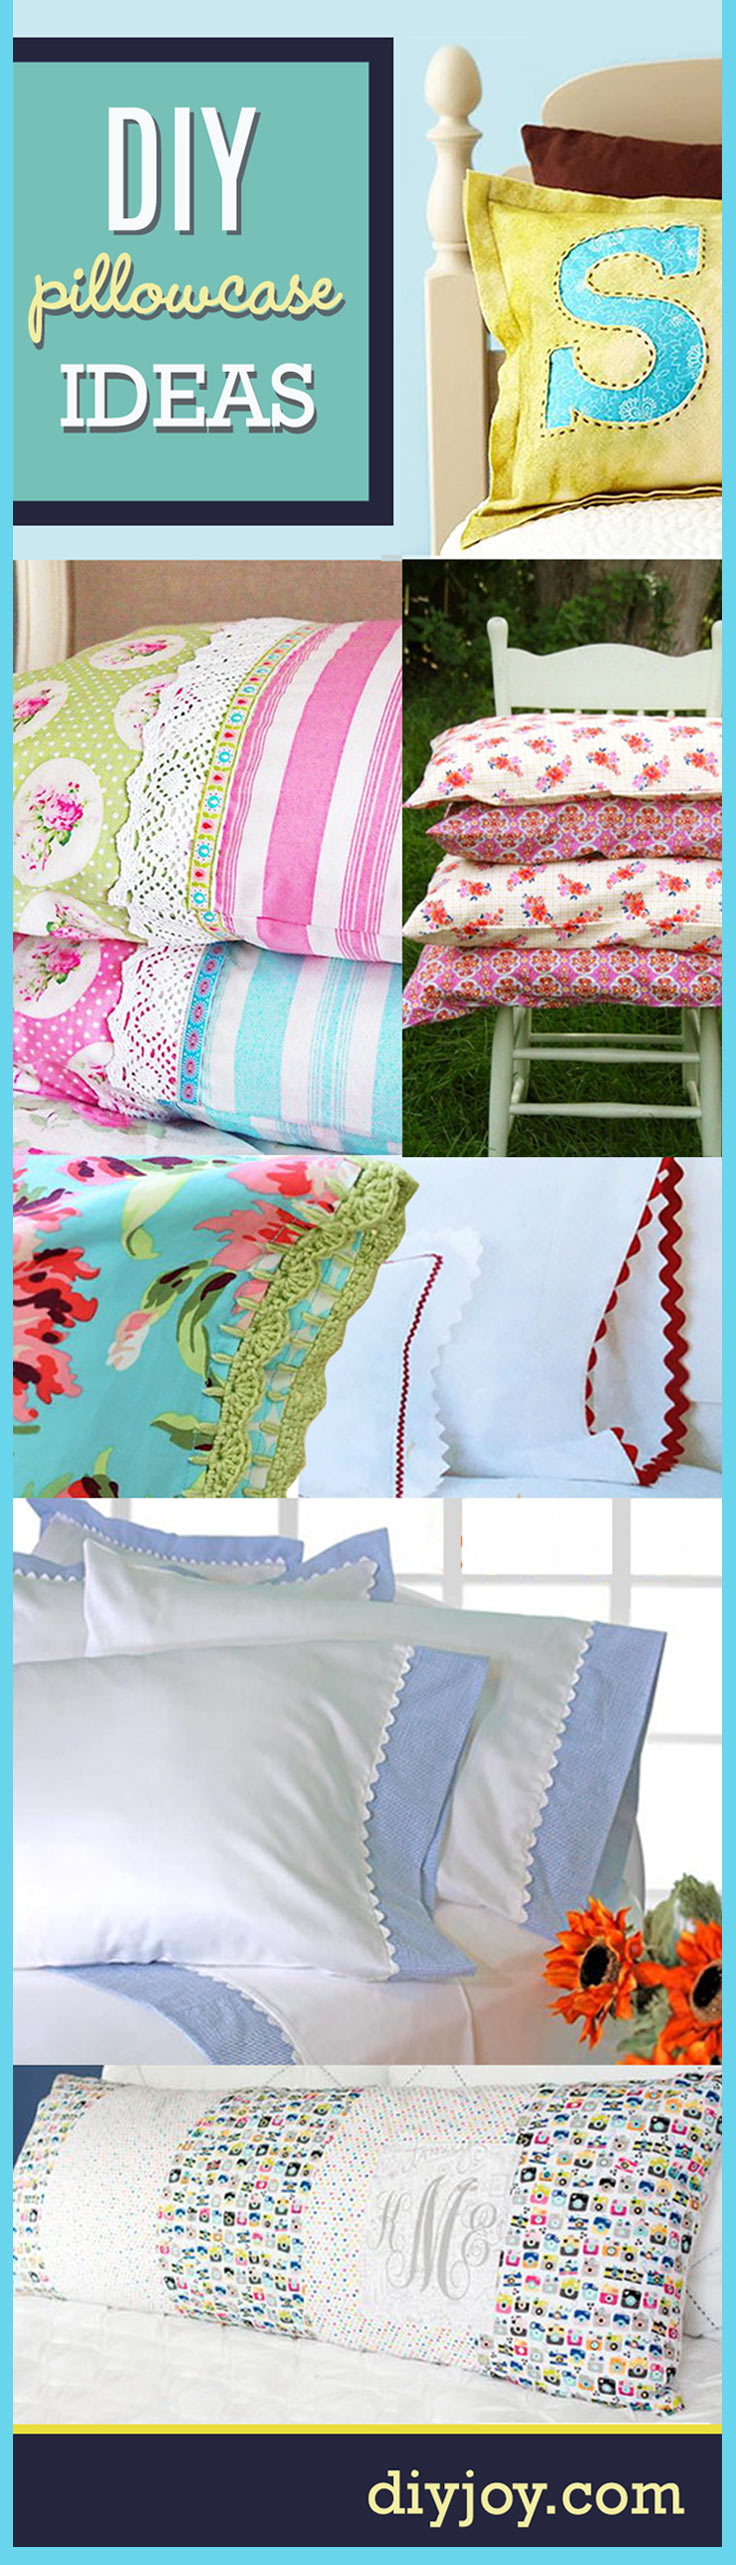 Sewing Projects for The Home- DIY Pillowcase Ideas | DIY JOY